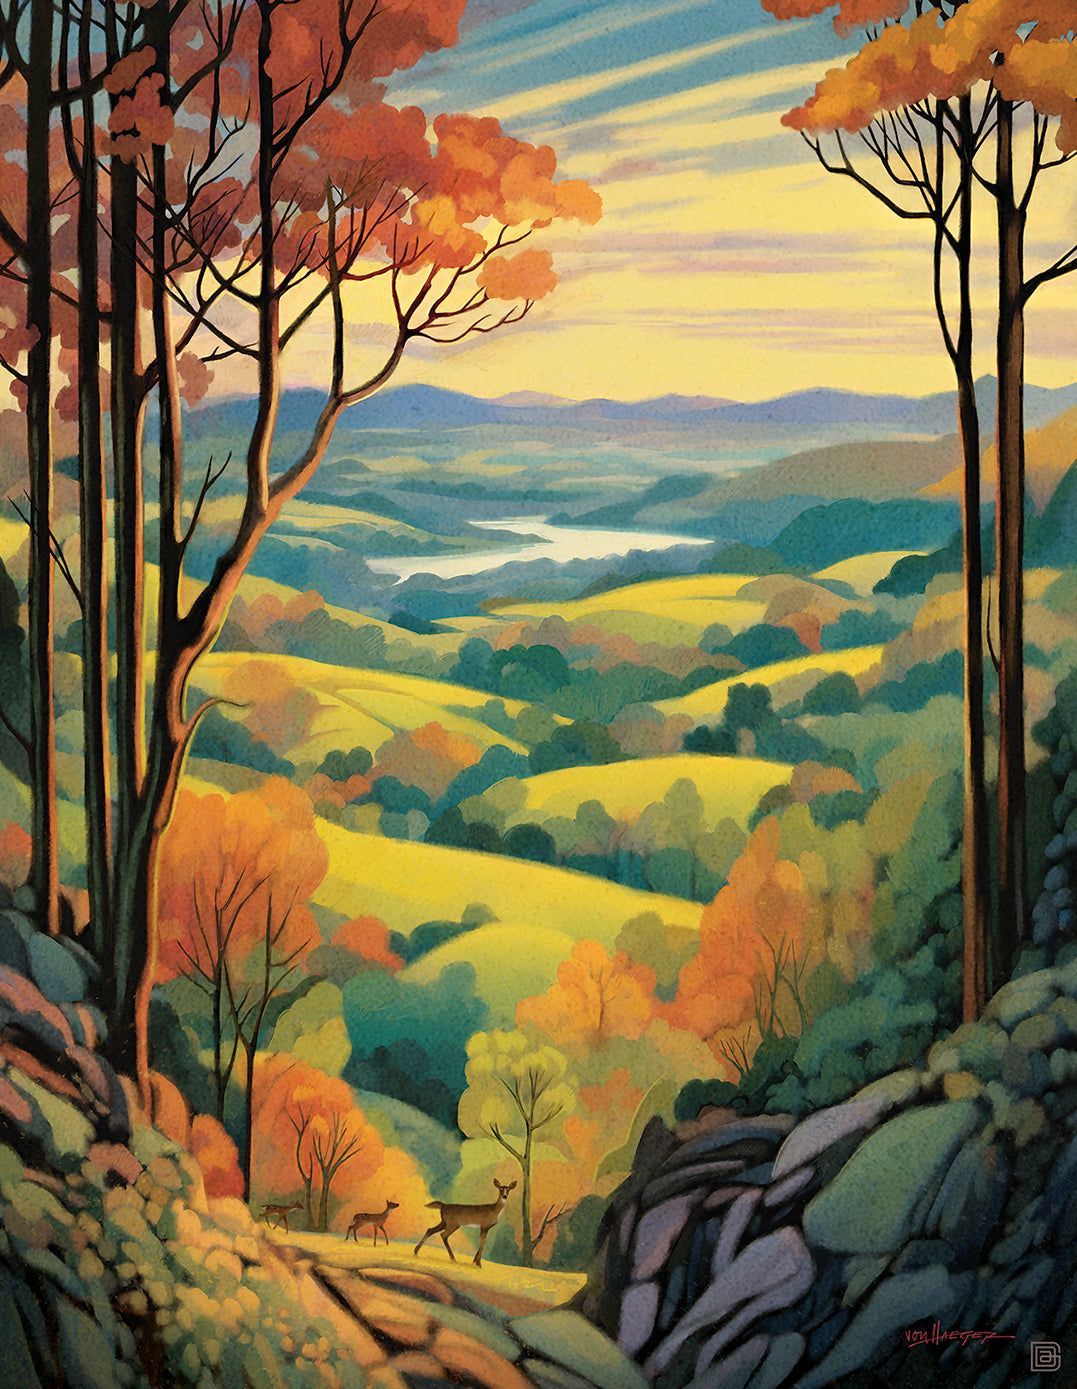 Autumn’s Artistry: Anderson Design Group’s Top Foliage-Inspired Prints